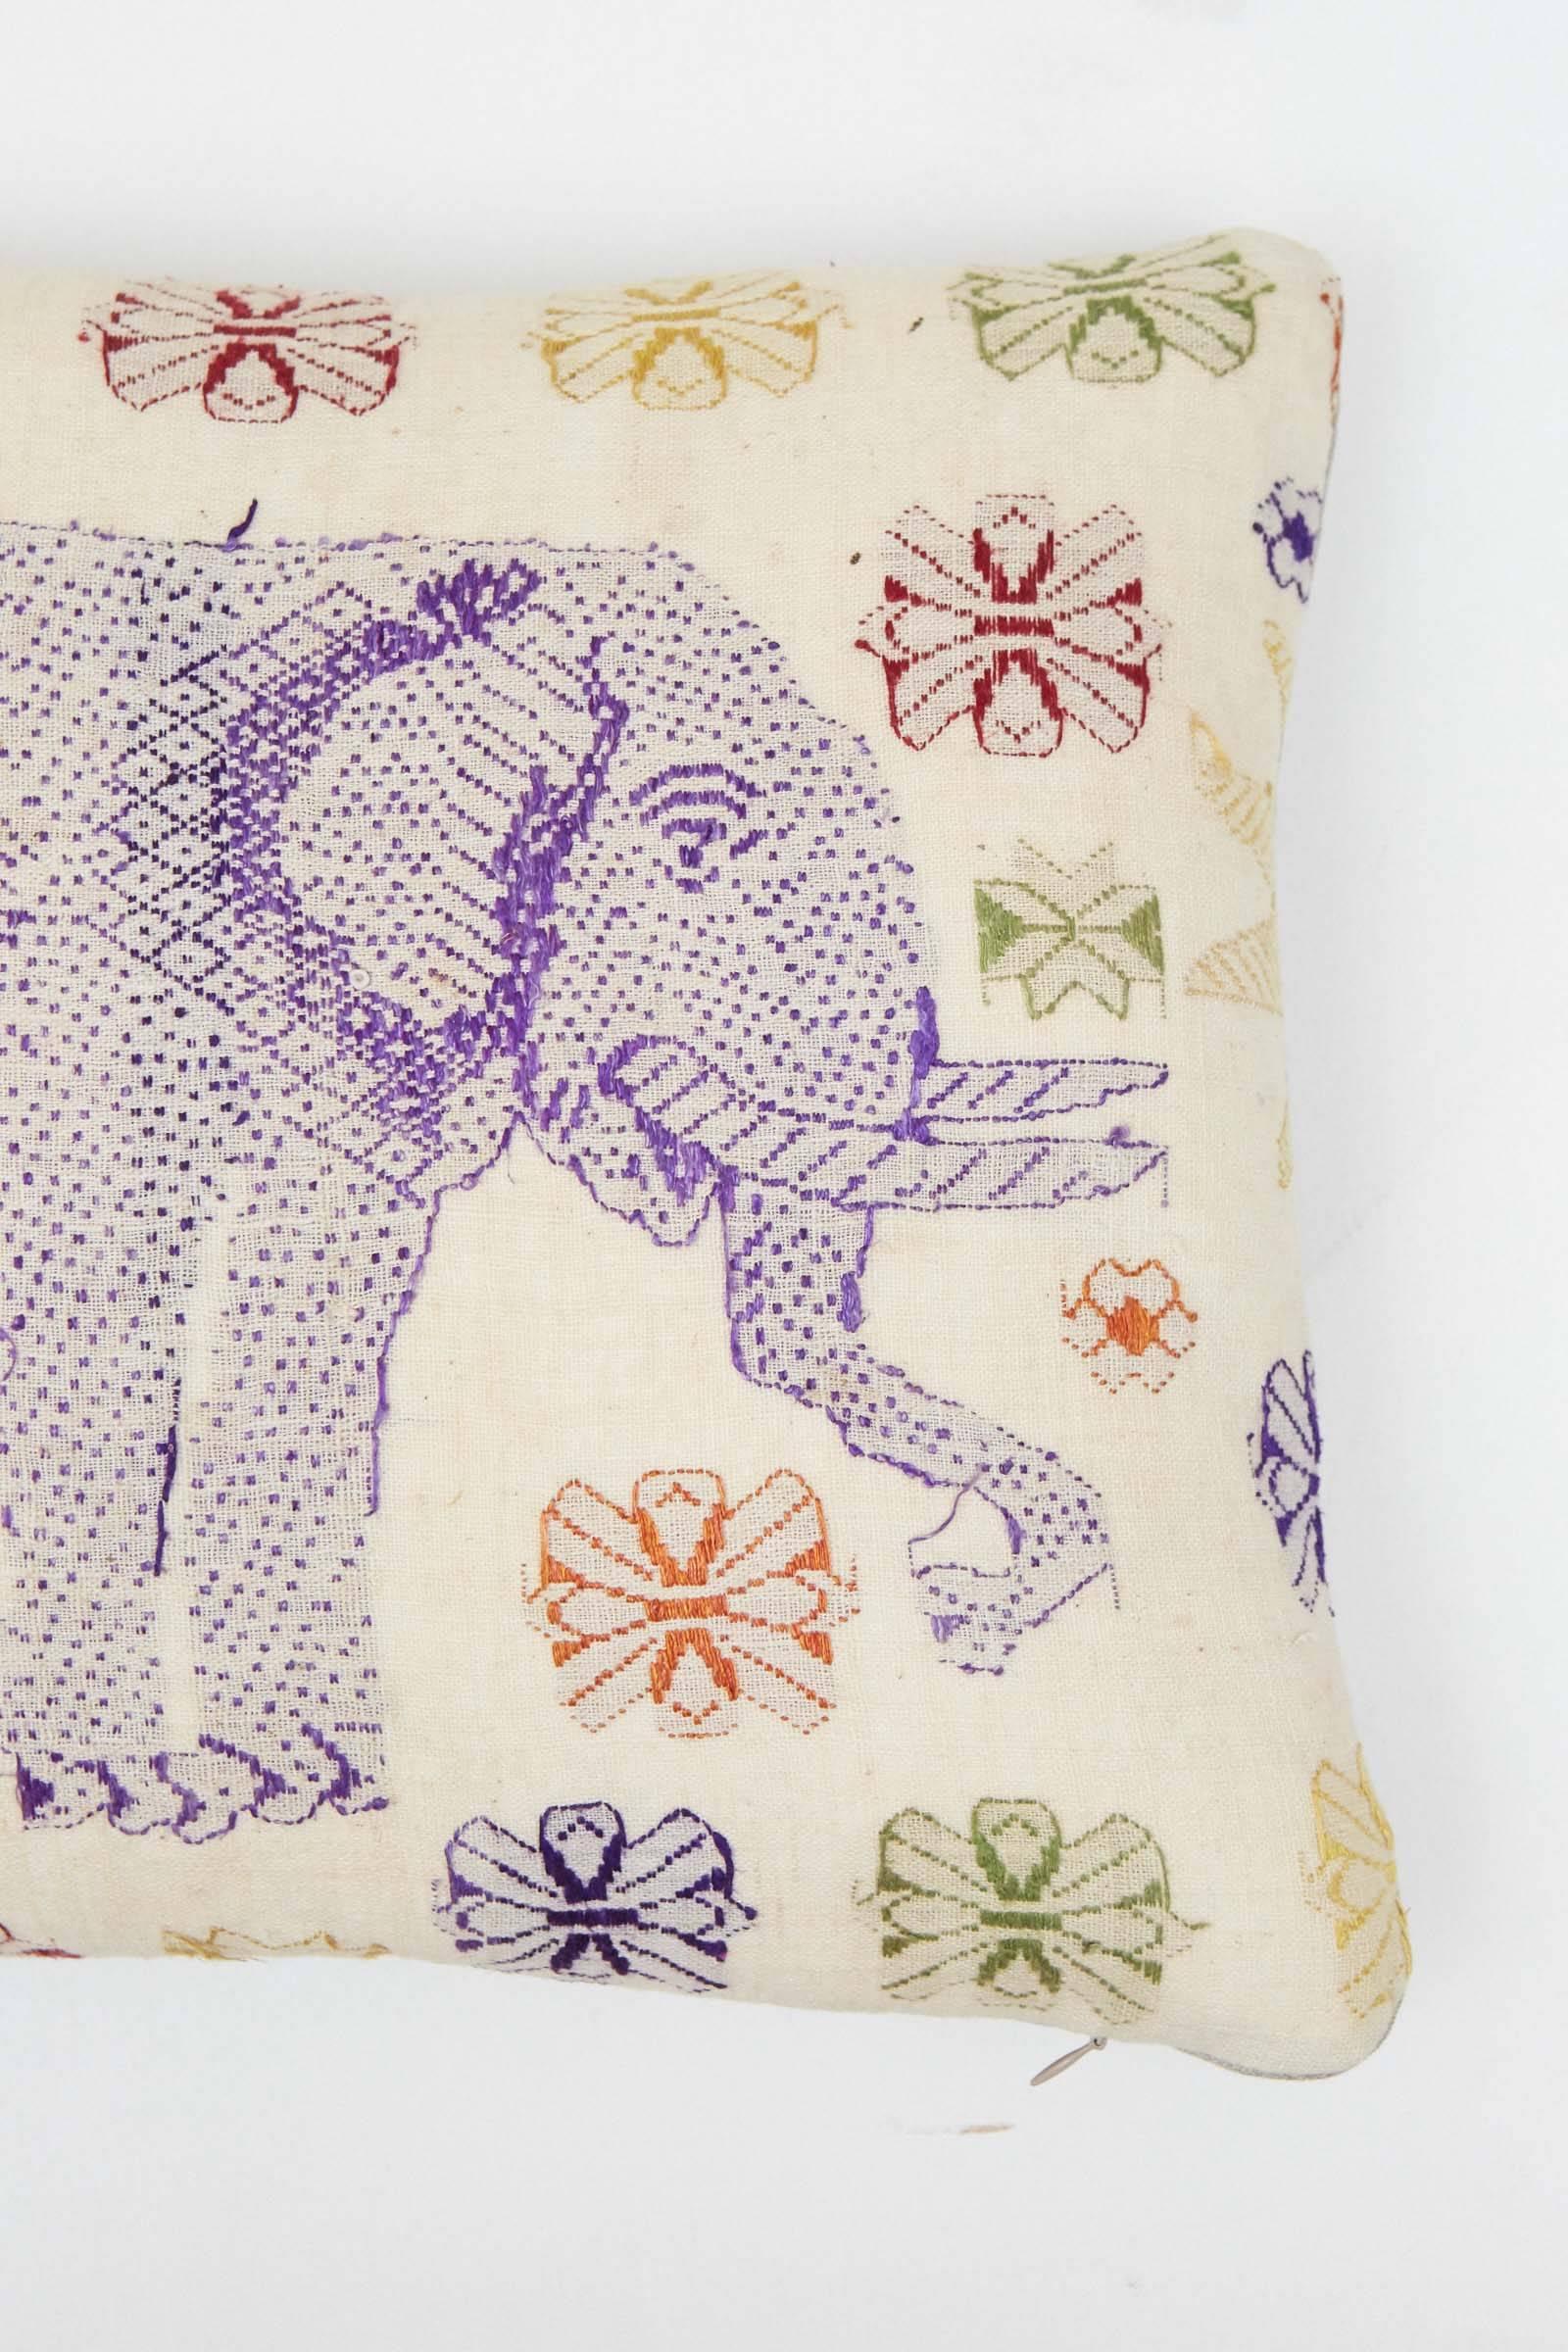 Vintage Tai (Ethnic minority group resident in Laos and Vietnam) hill tribe textile pillow. Hand embroidery. Cotton floss on handwoven linen fabric. Elephant motif. Natural linen back, invisible zipper and feather and down fill. Measures: 14 x 18.
 